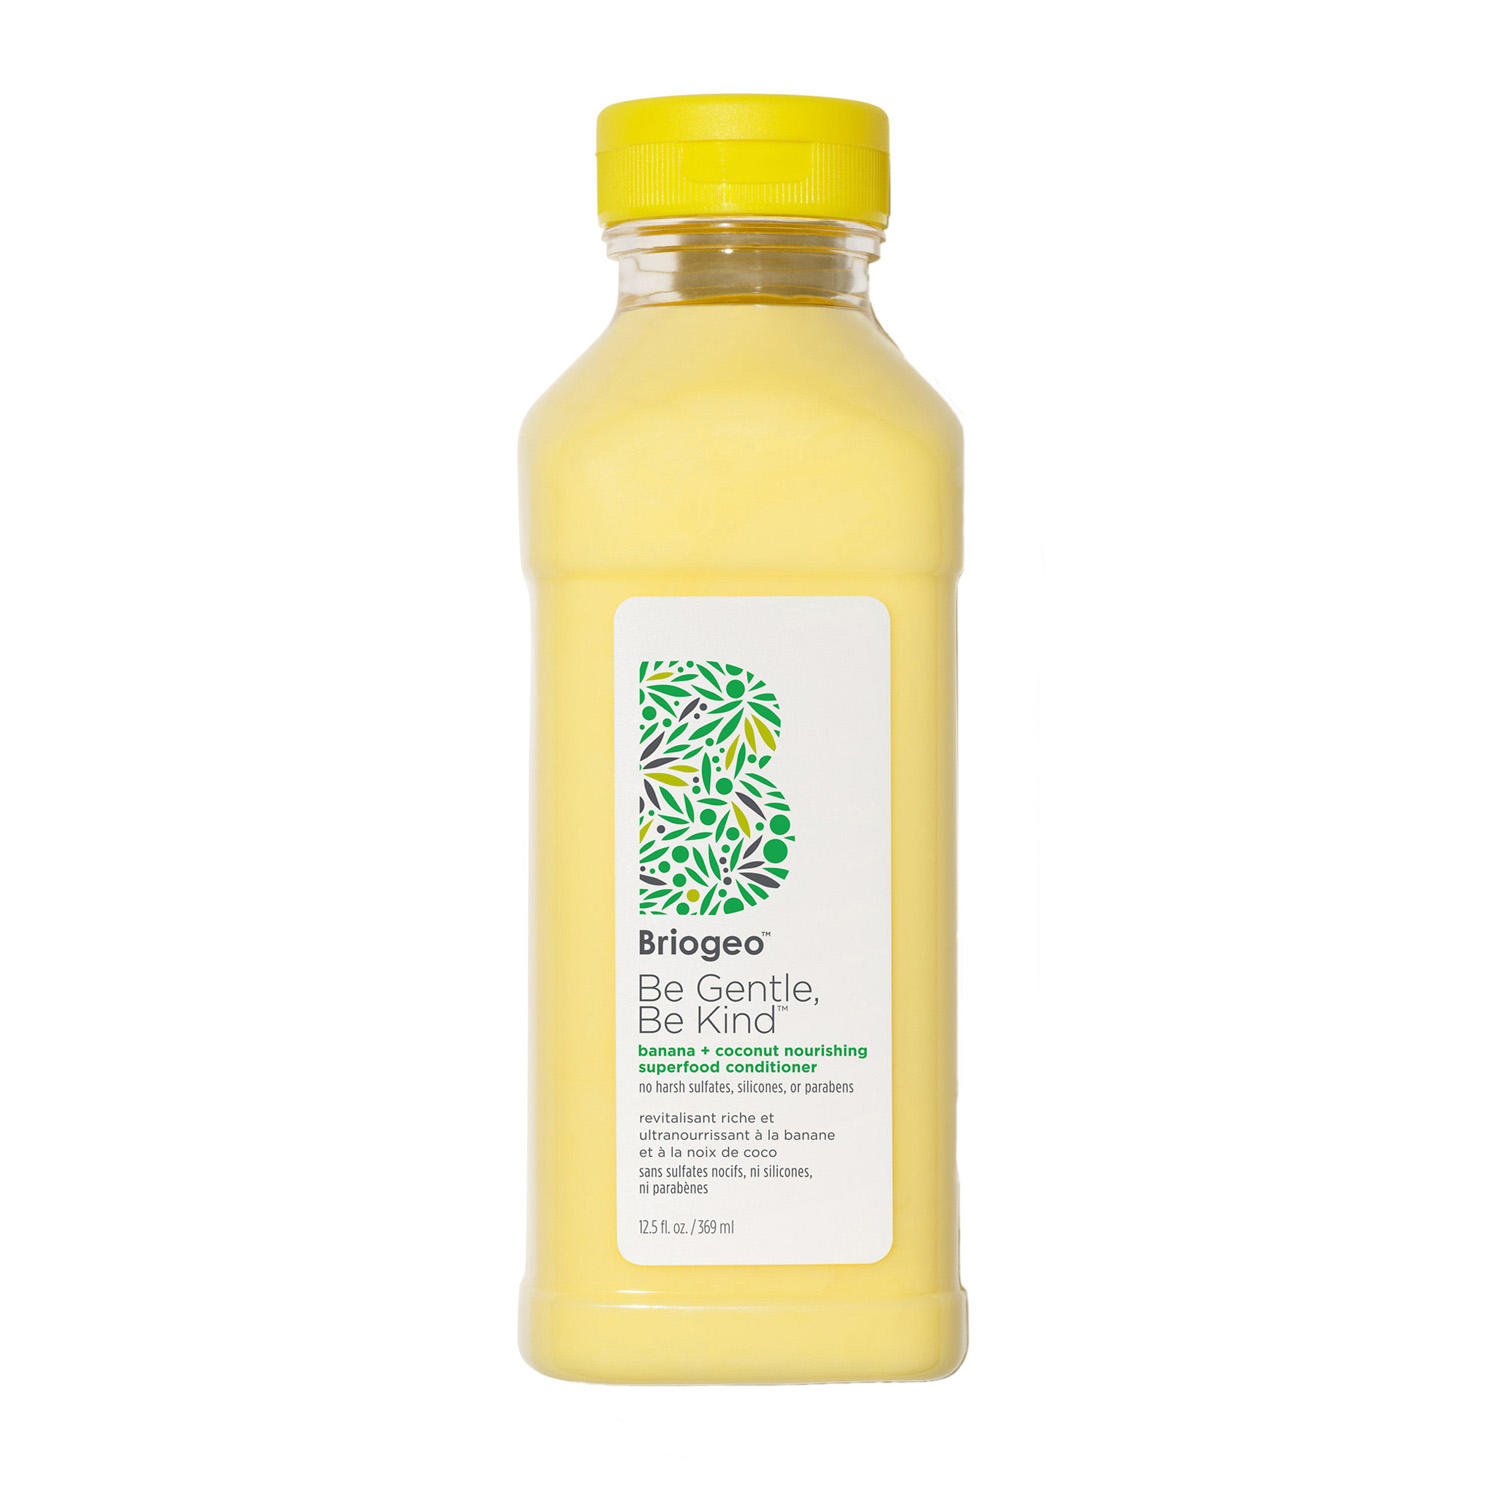 BE GENTLE BE KIND™ BANANA + COCONUT NOURISHING SUPERFOOD CONDITIONER 12.5OZ